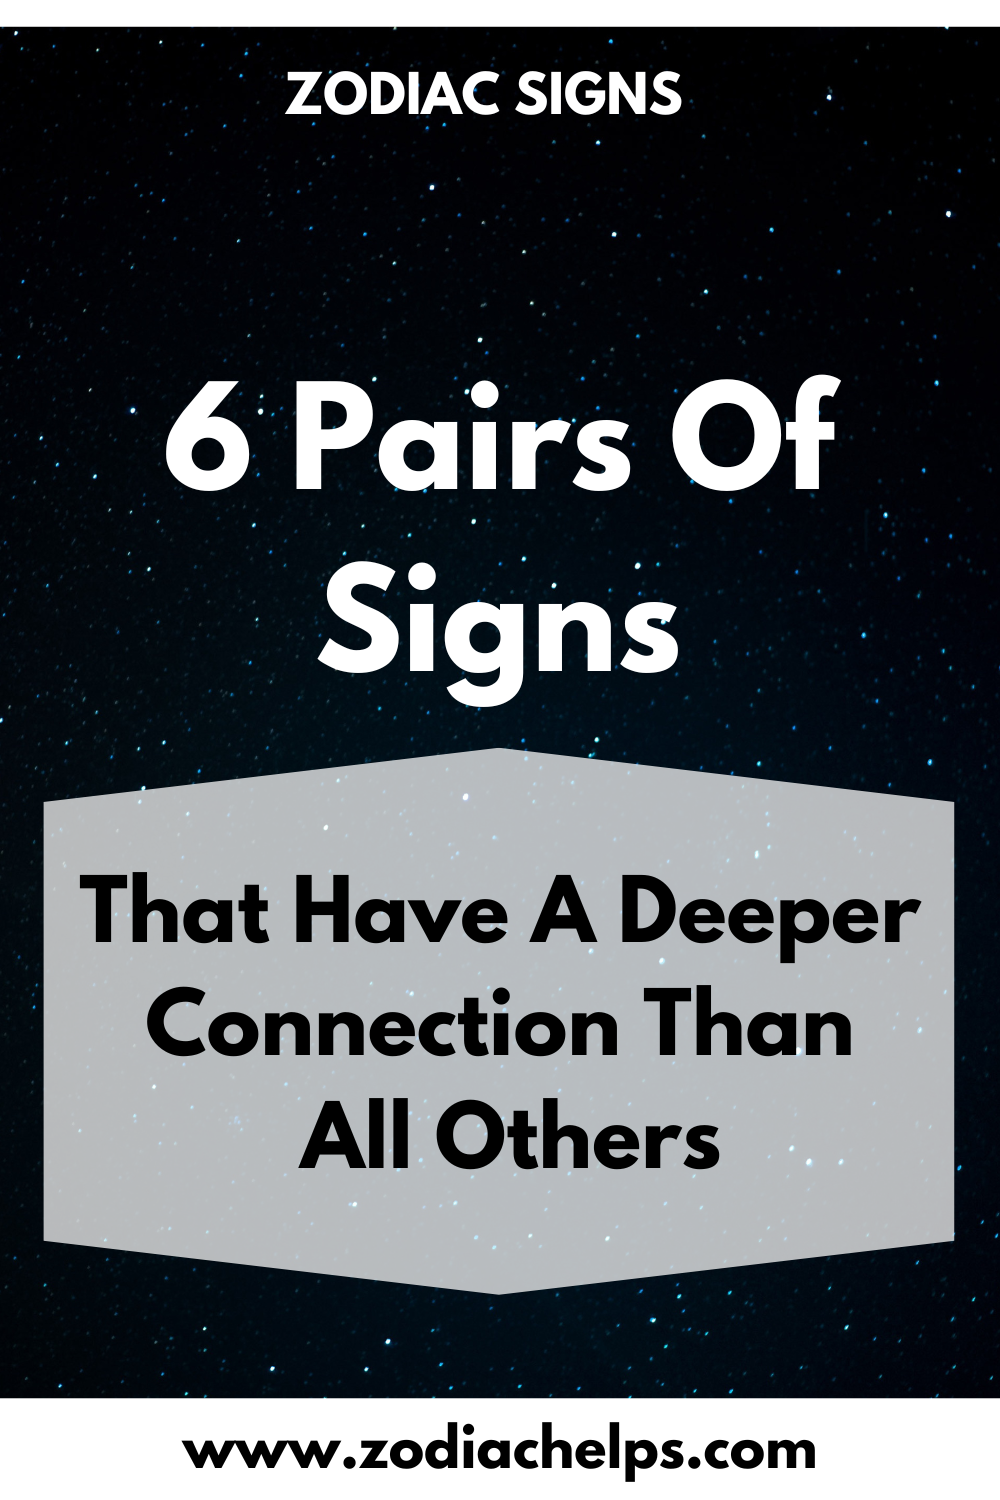 6 Pairs Of Signs That Have A Deeper Connection Than All Others